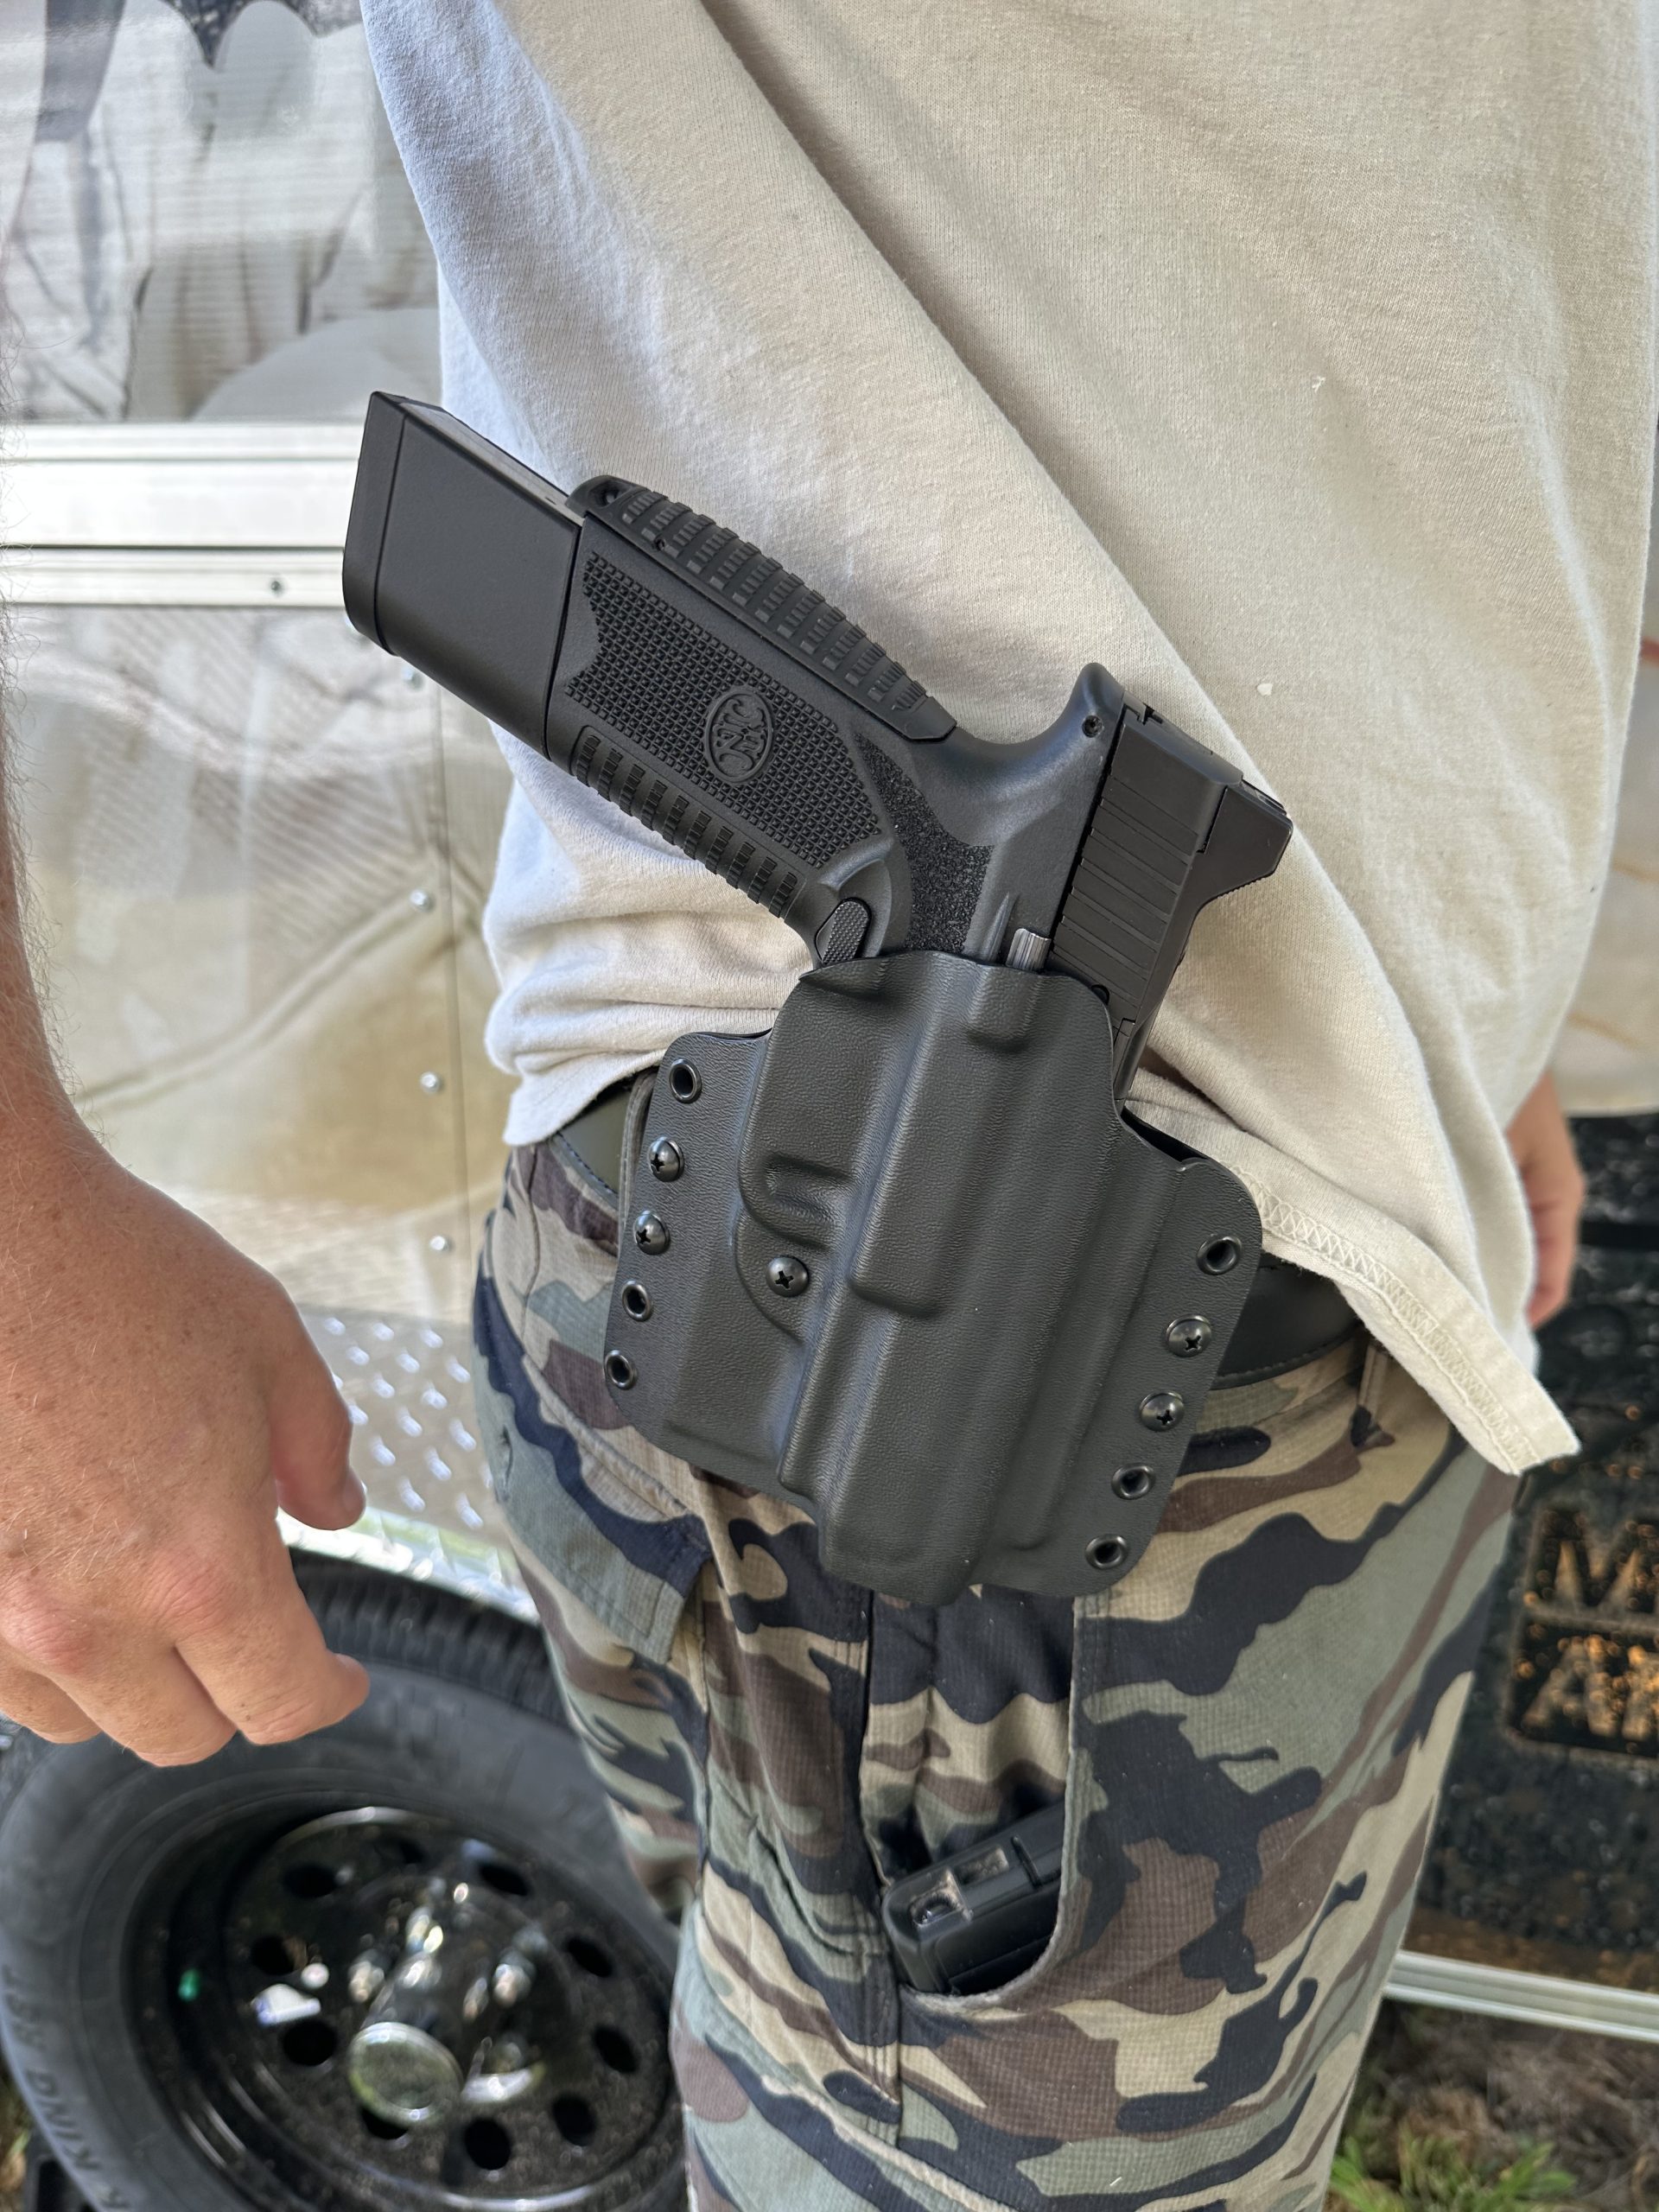 FN 510 Holster - Made in U.S.A. - Lifetime Warranty